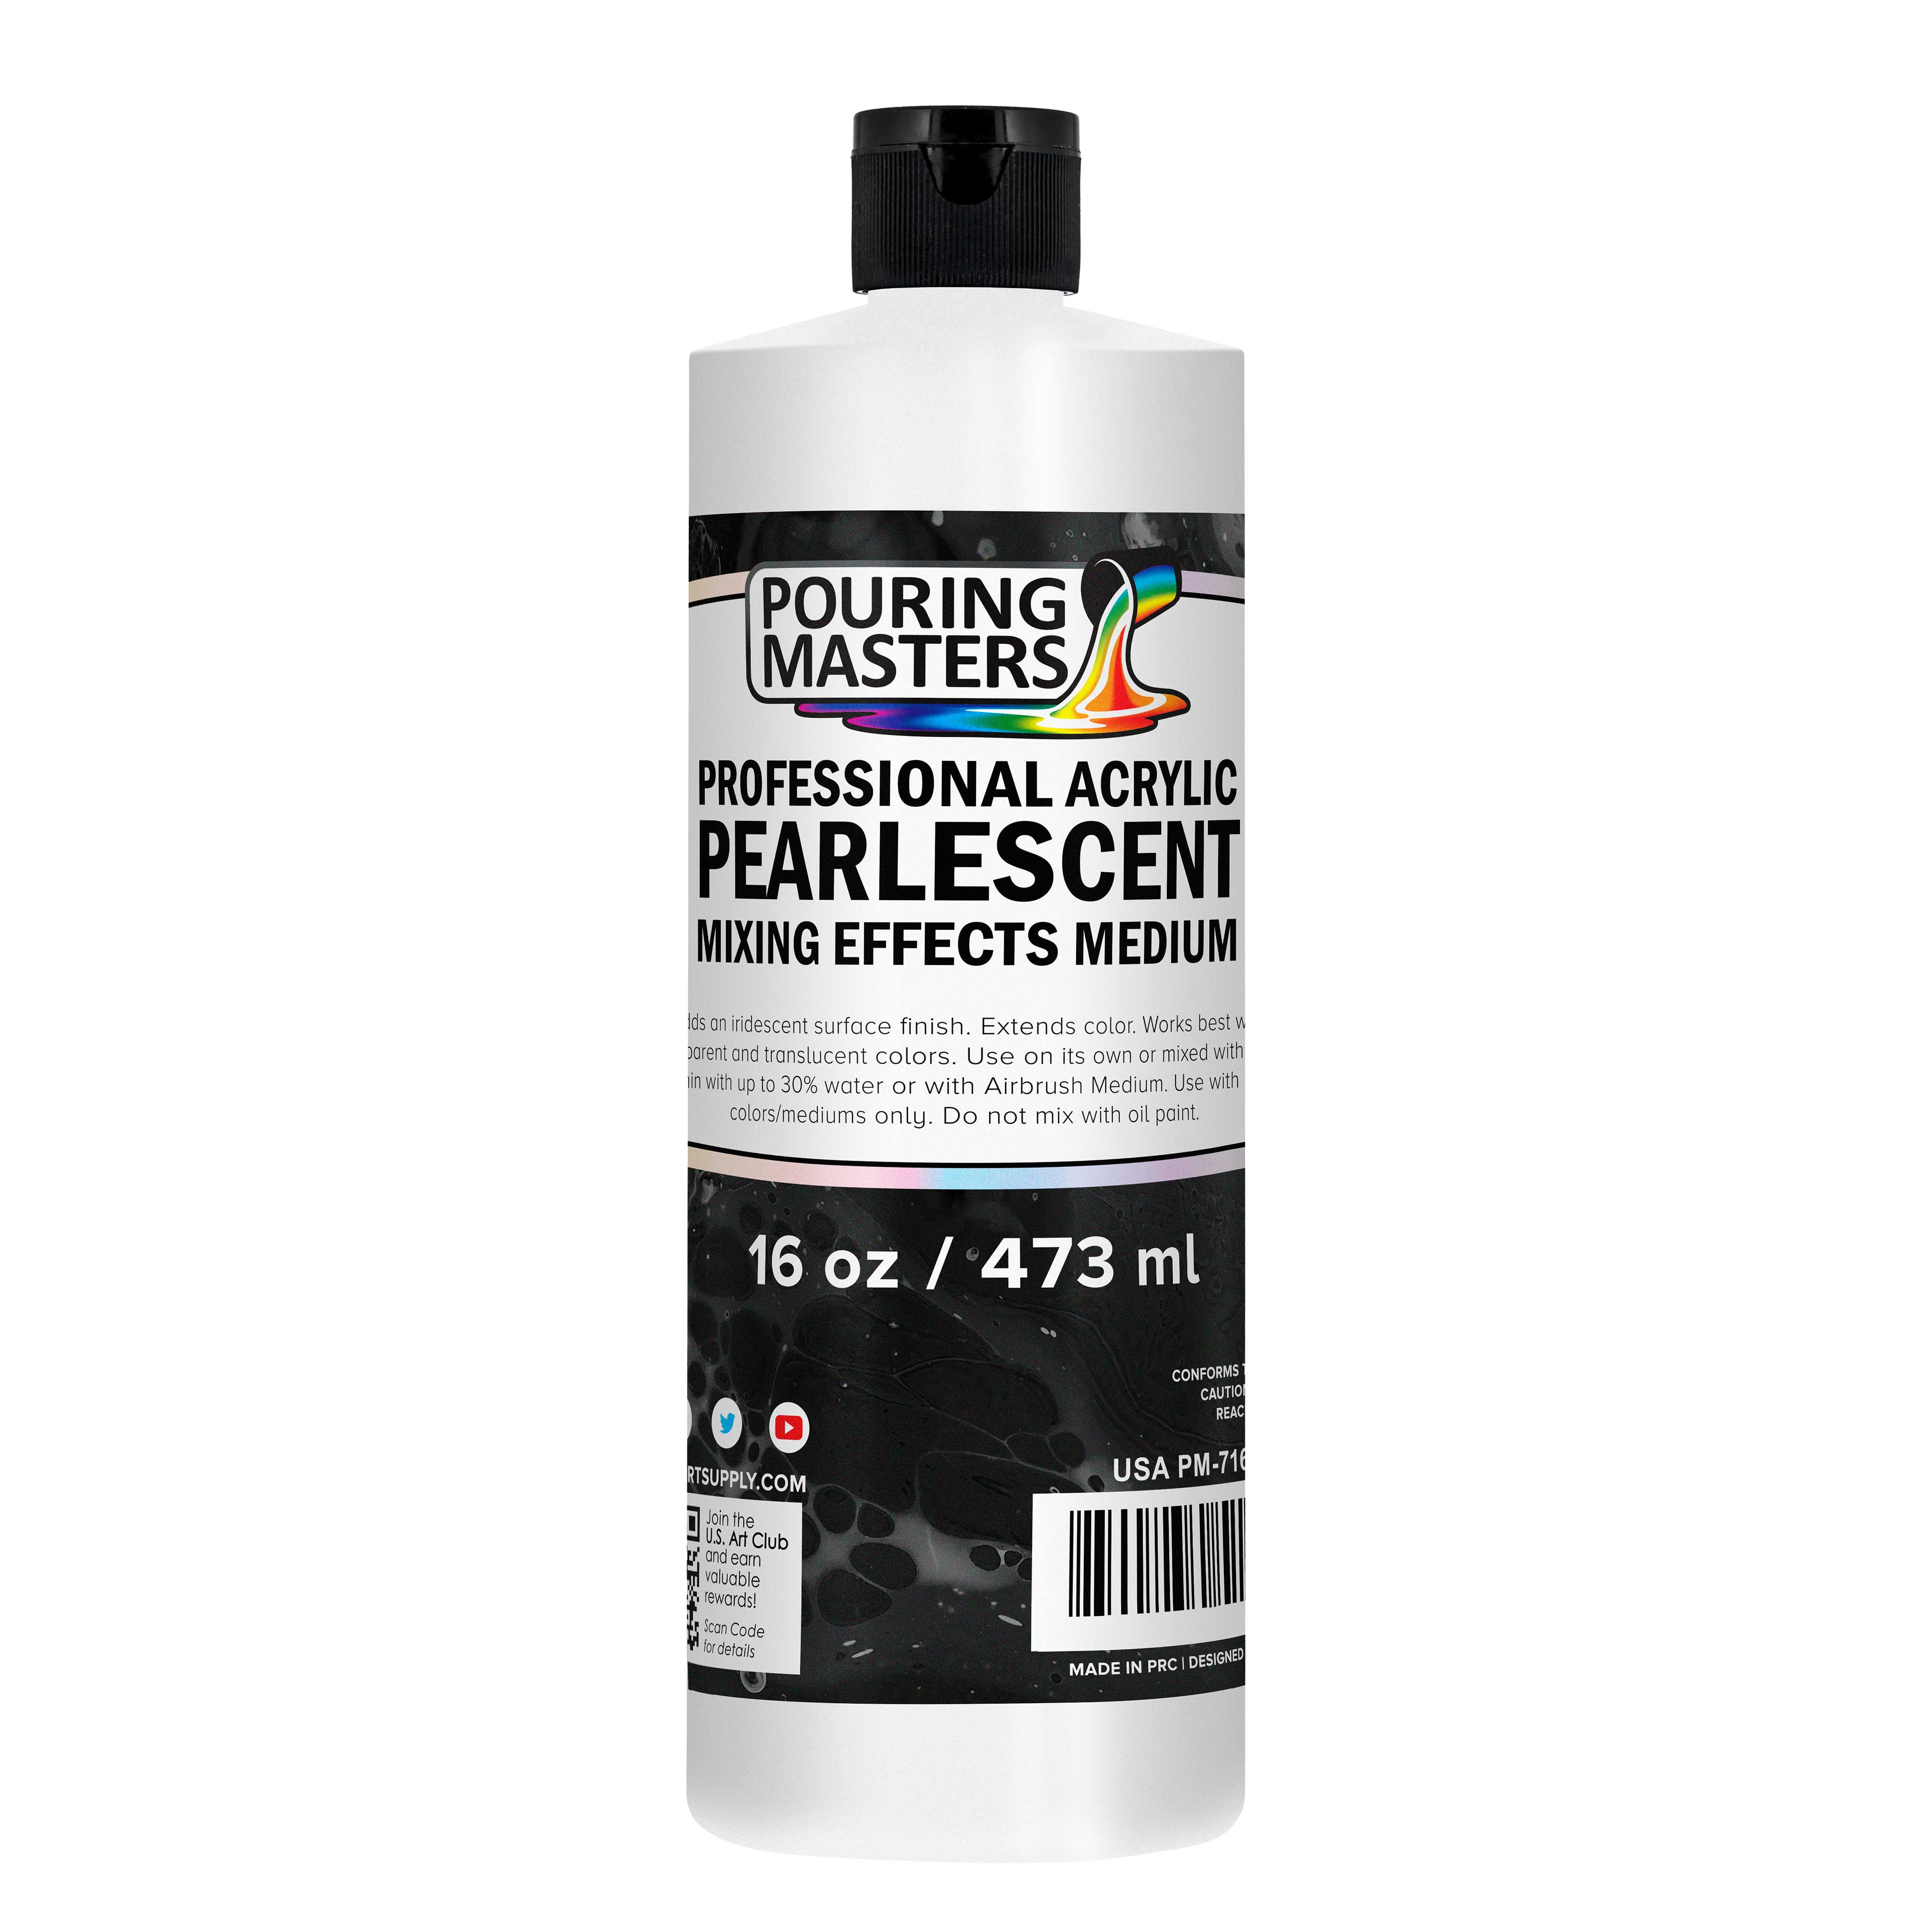 Pouring Masters Professional Acrylic Pearlescent Mixing Effects Medium, 16  oz. (Pint) - Create Pearl Iridescent Metallic Effects, Improve Flow  Consistency, Artist Techniques, Mix Art Acrylic Paint 